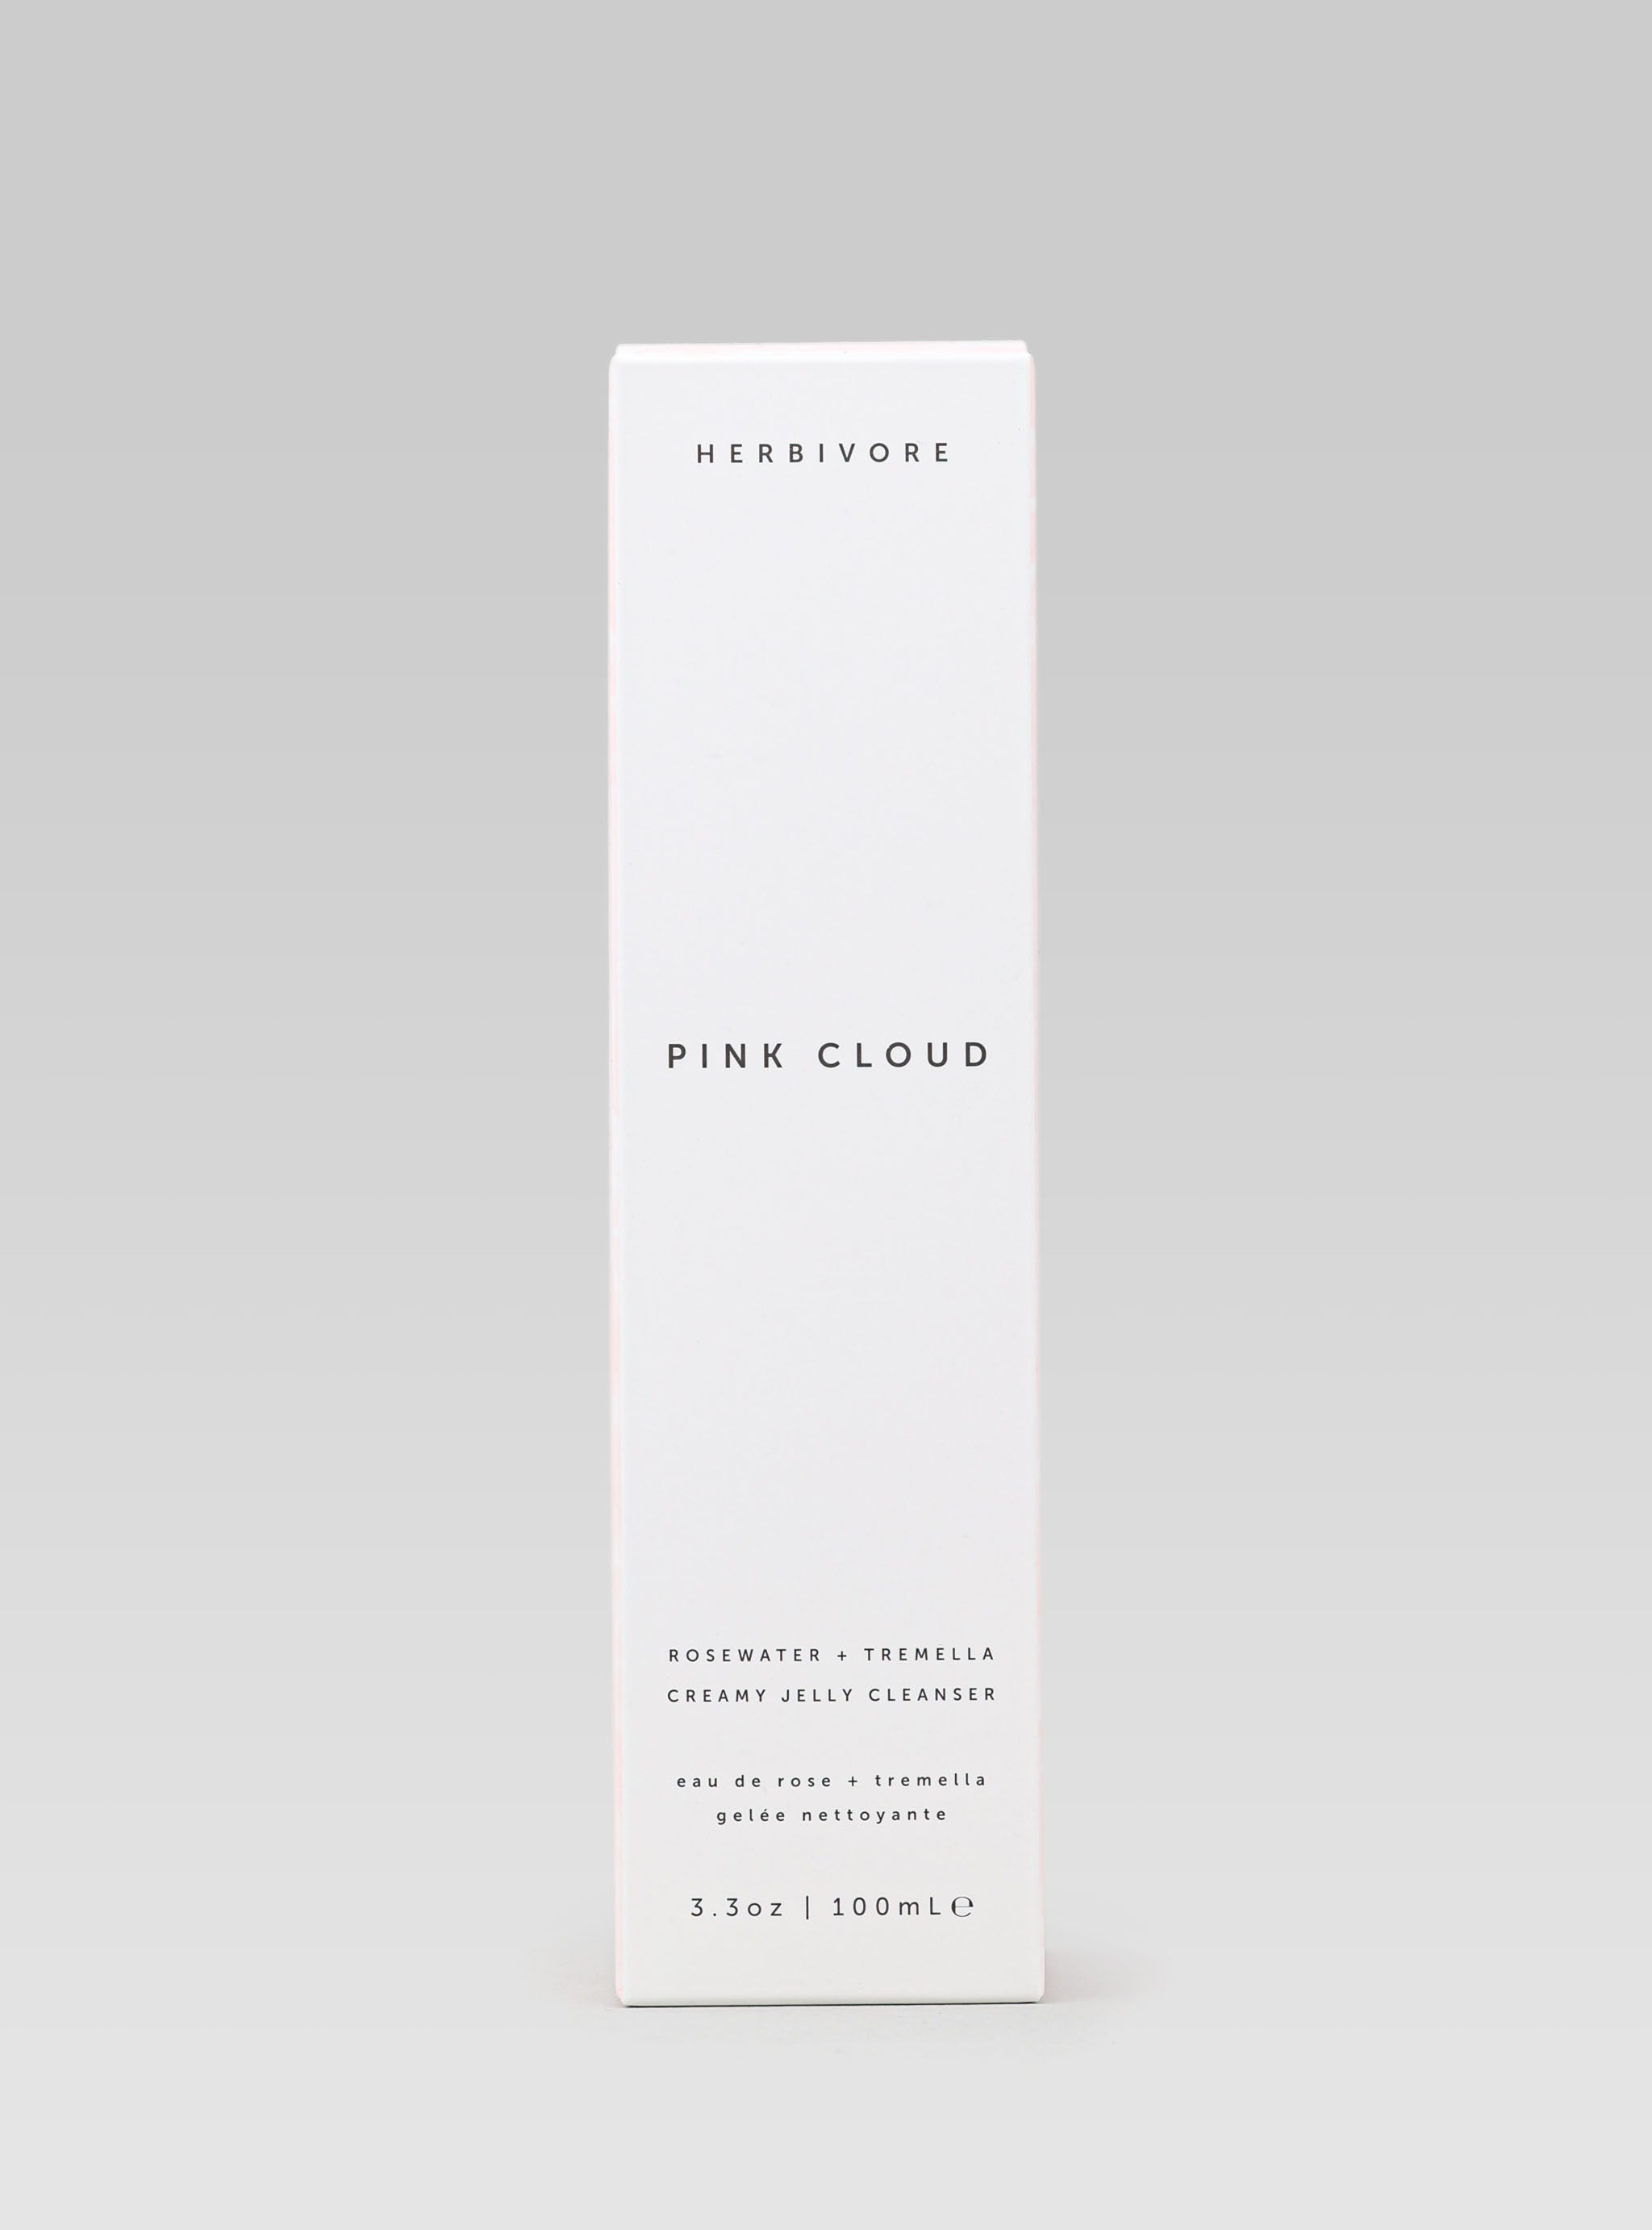 HERBIVORE BOTANICALS Pink Cloud Creamy Jelly Cleanser product packaging 